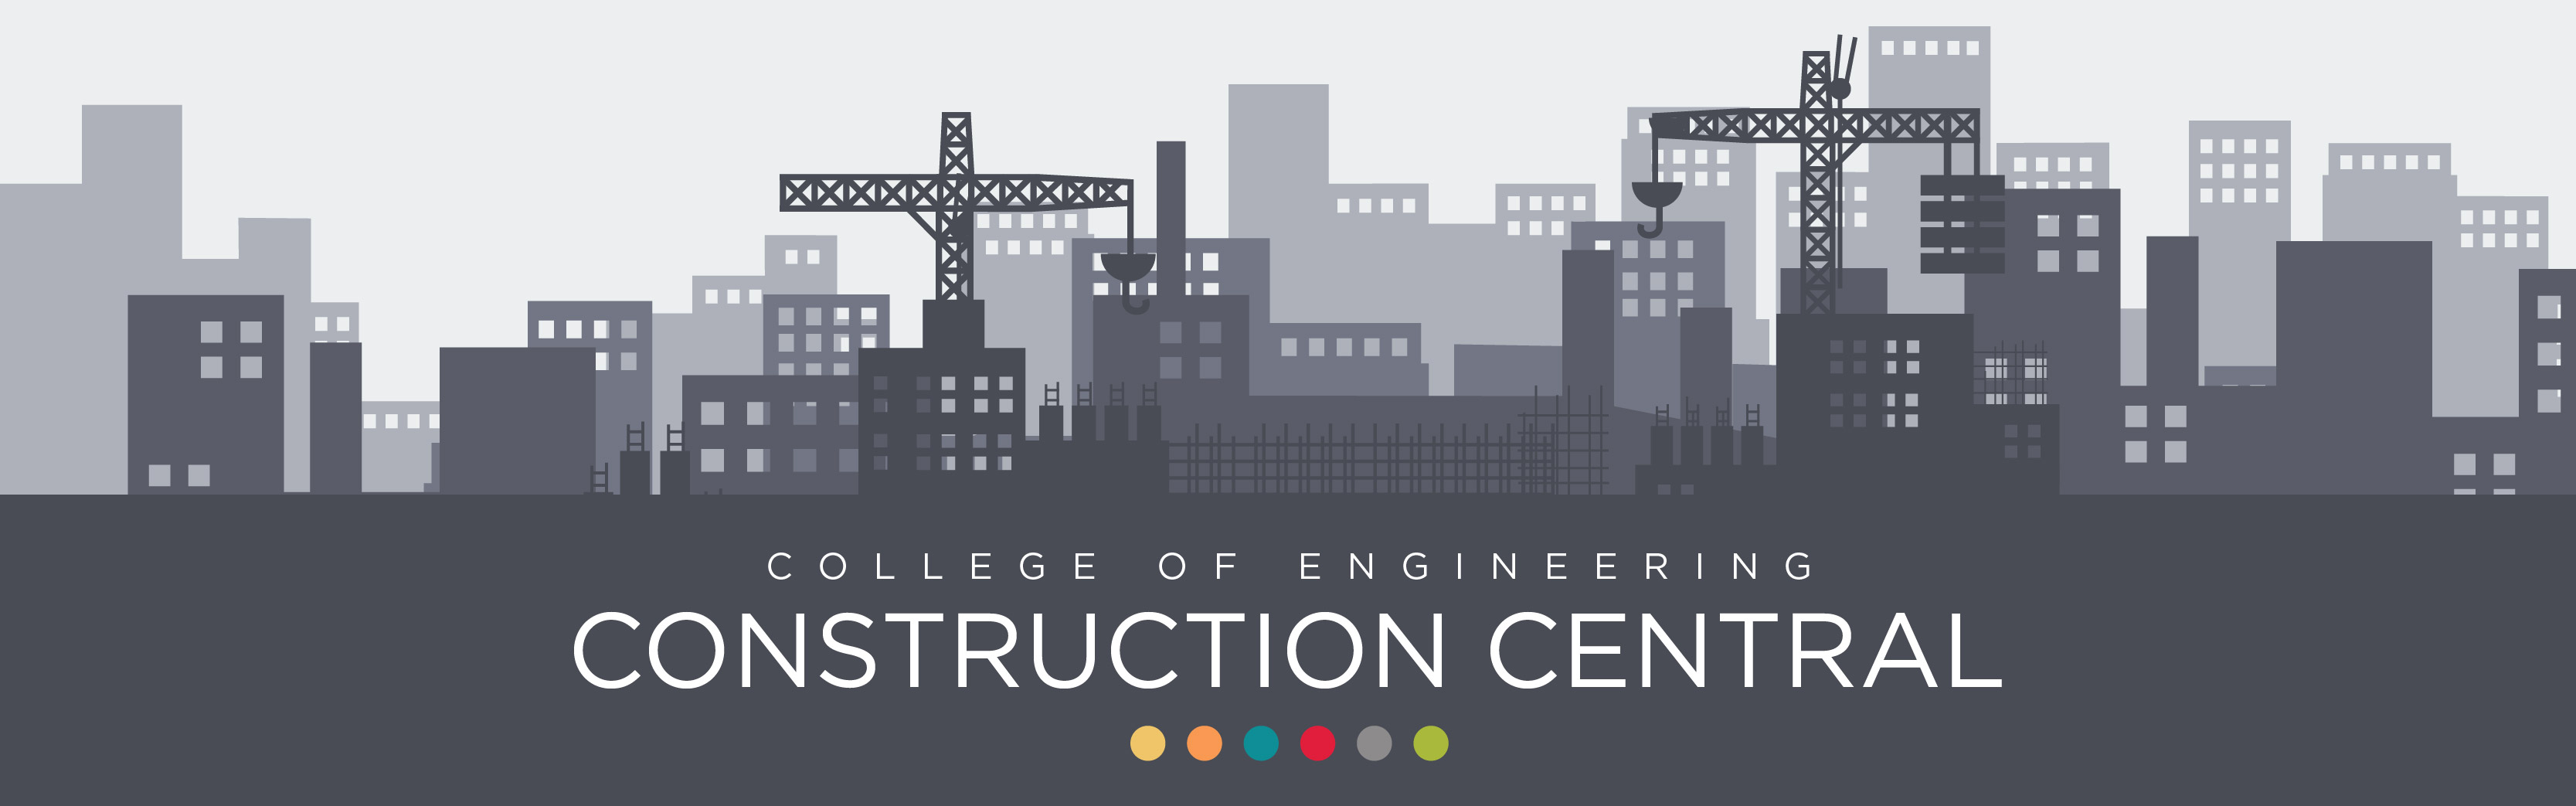 Construction Central website provides updates on the College of Engineering's transformational projects.